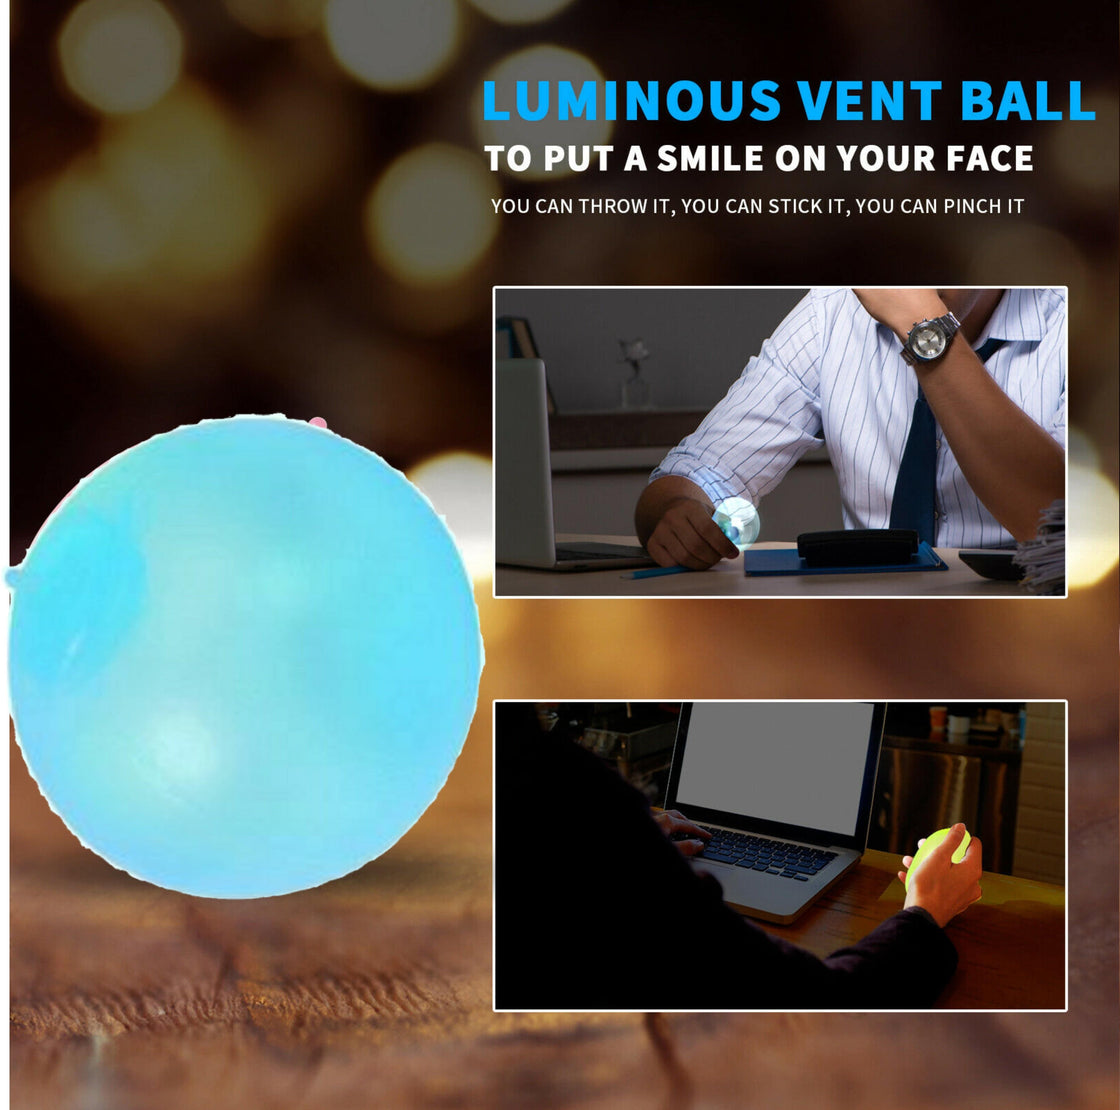 Luminescent Multi Color Glowing Sticky Ceiling Balls - JigyasaLLC